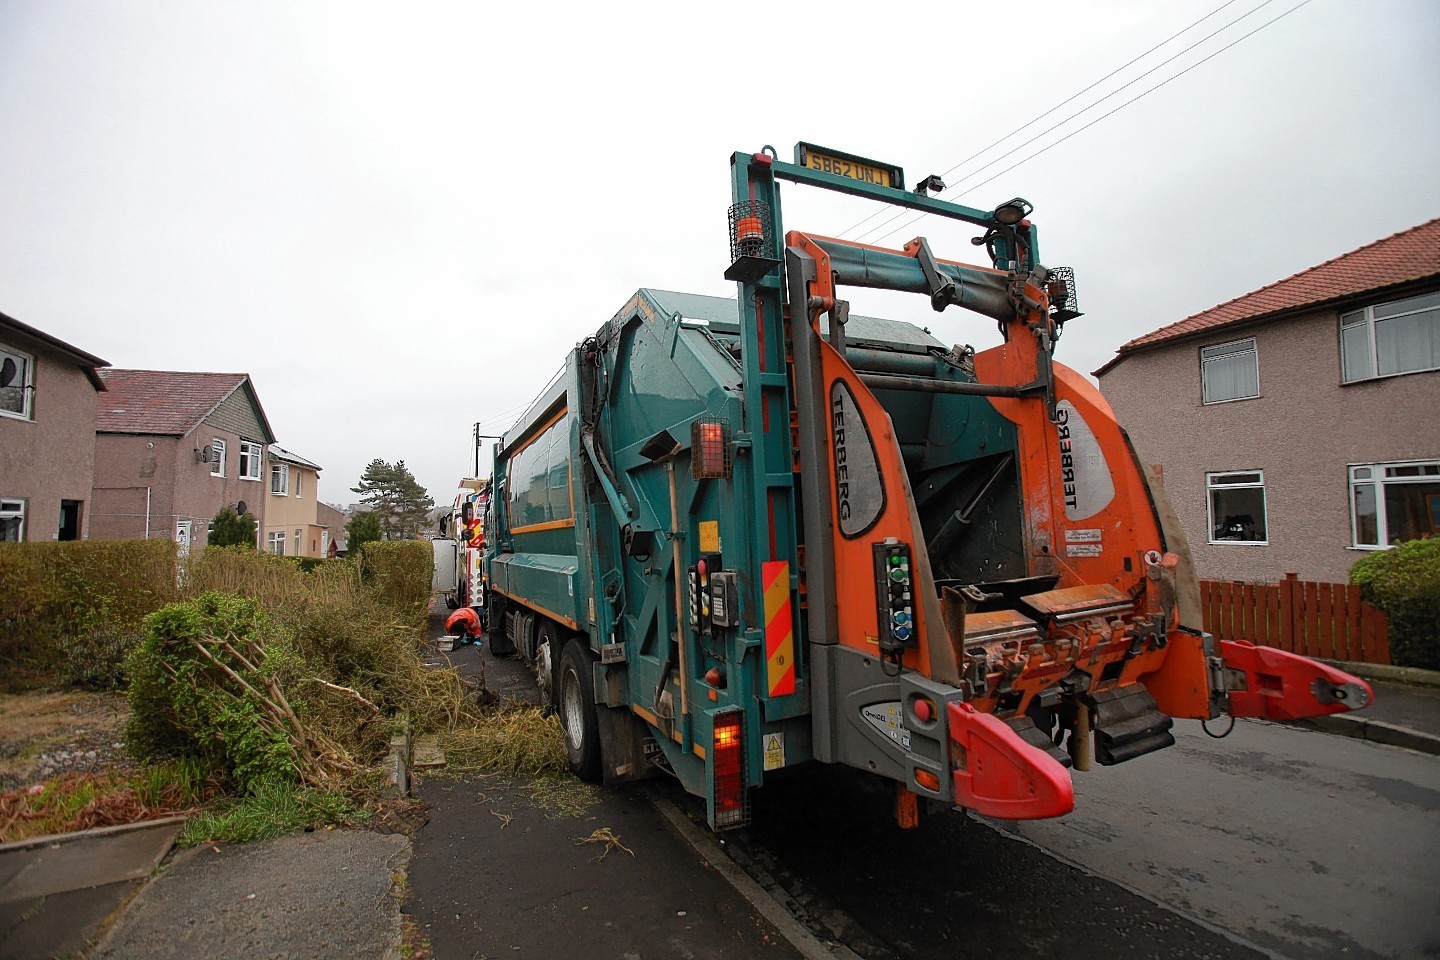 A bin lorry that had crashed into a front garden on Croftside Avenue in southside of Glasgow after it is believed the driver took unwell at the wheel.